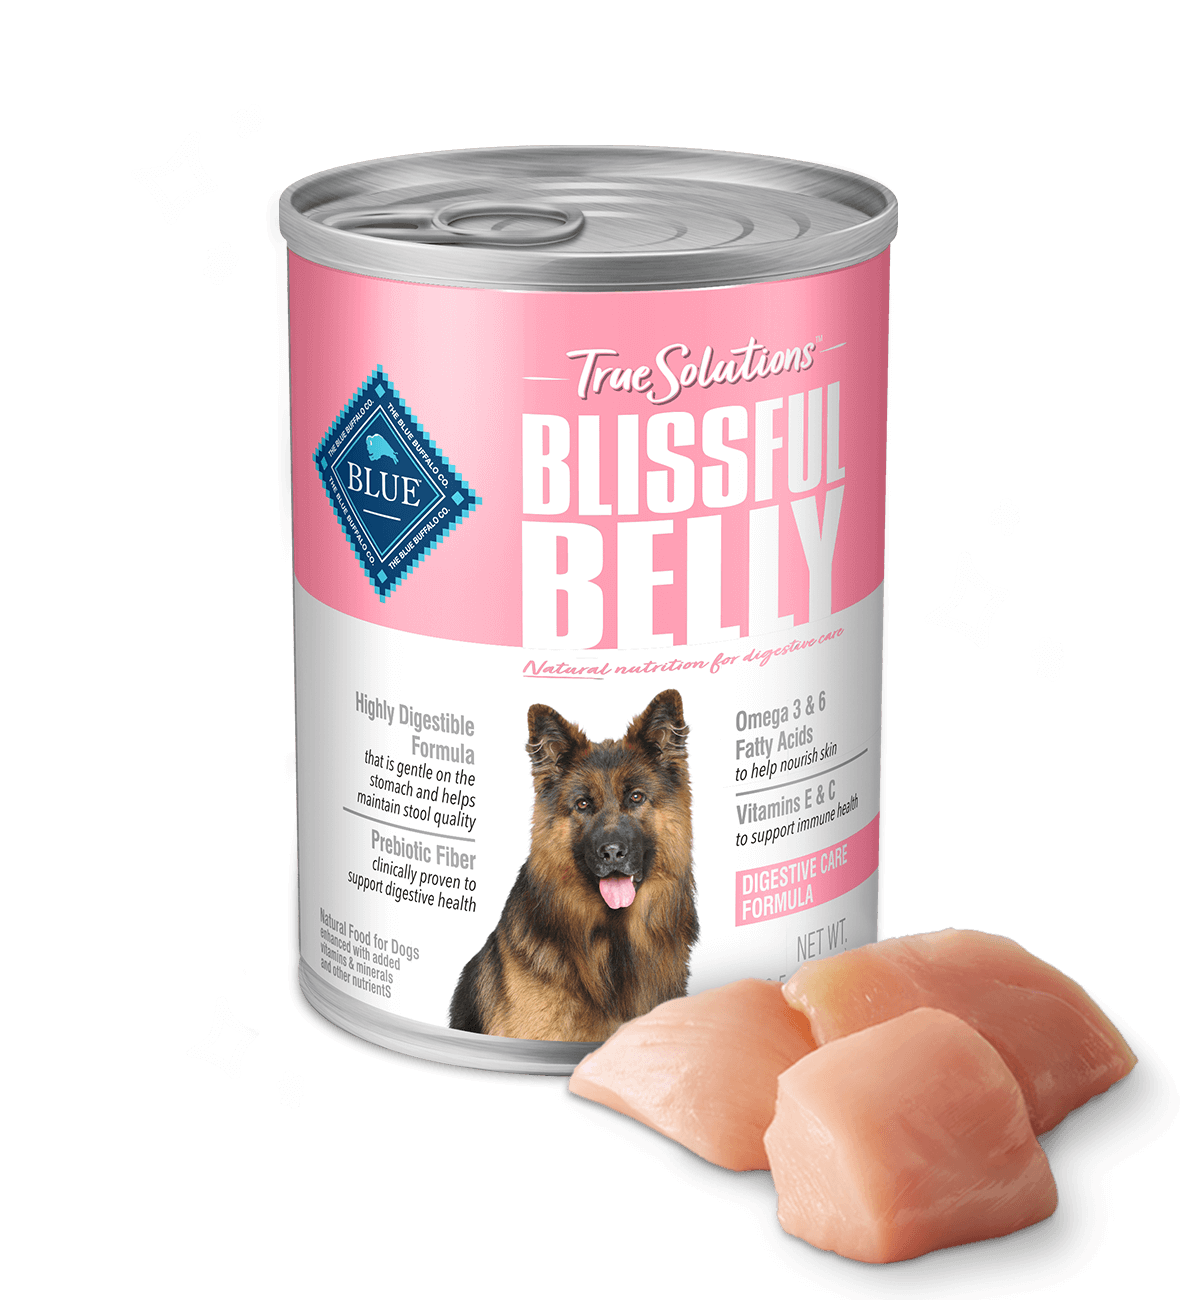 True Solutions blissful belly wet dog food